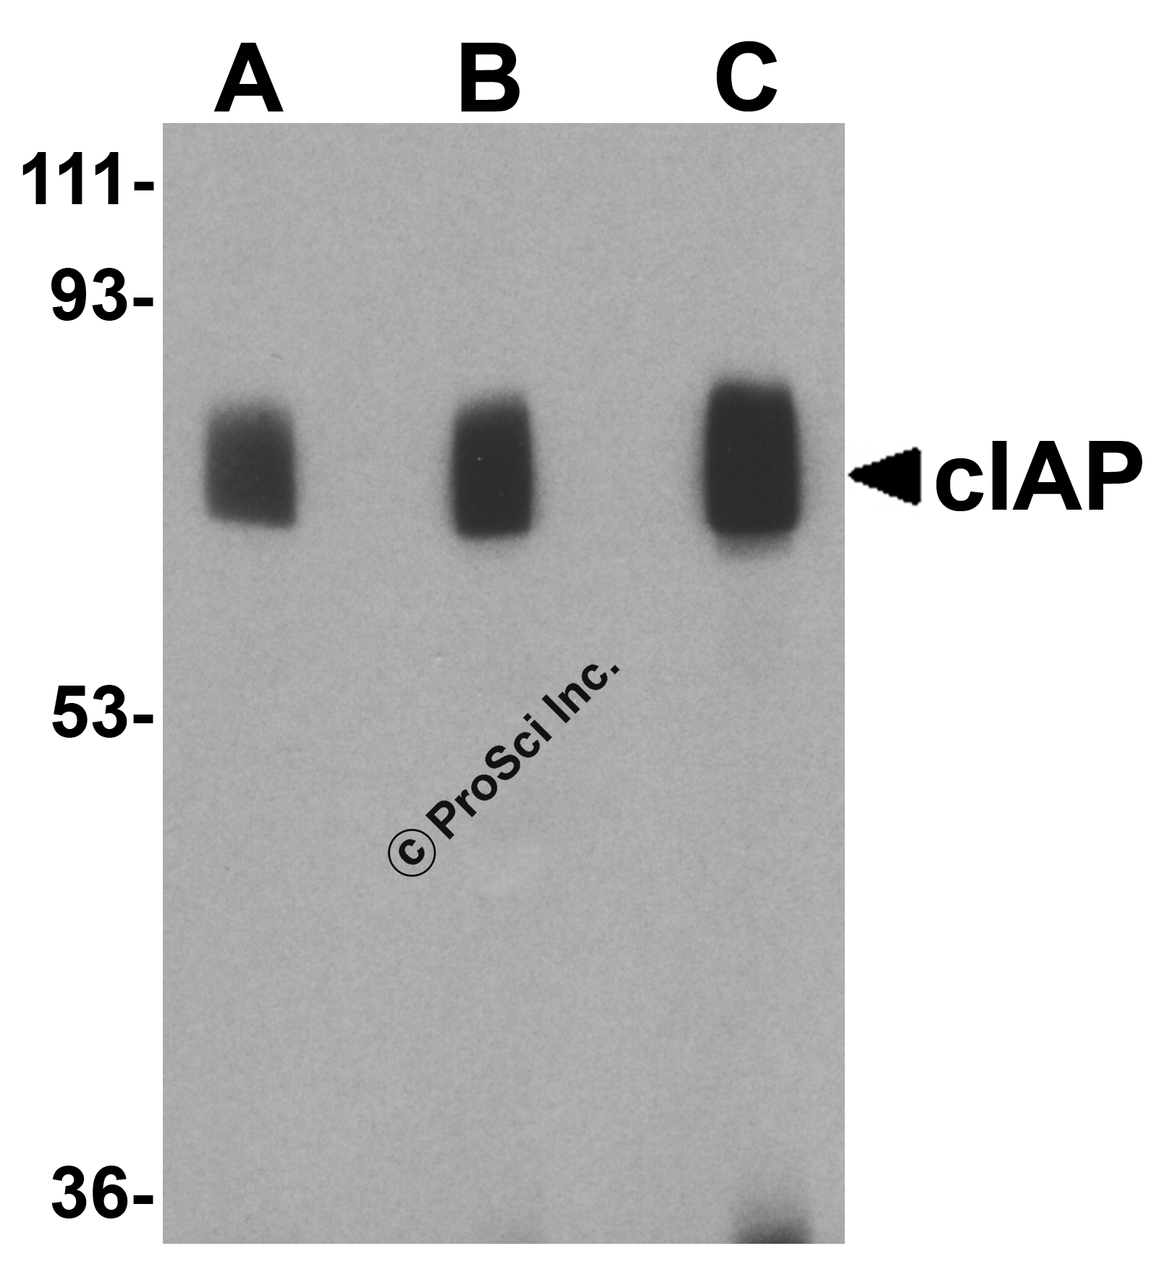 Figure 1 Western Blot Validation in Human Lung Lysate
Loading: 15 &#956;g of lysates per lane.
Antibodies: cIAP 3325 (A: 1 &#956;g/mL, B: 2 &#956;g/mL and C: 4 &#956;g/mL ) , 1h incubation at RT in 5% NFDM/TBST.
Secondary: Goat anti-rabbit IgG HRP conjugate at 1:10000 dilution.